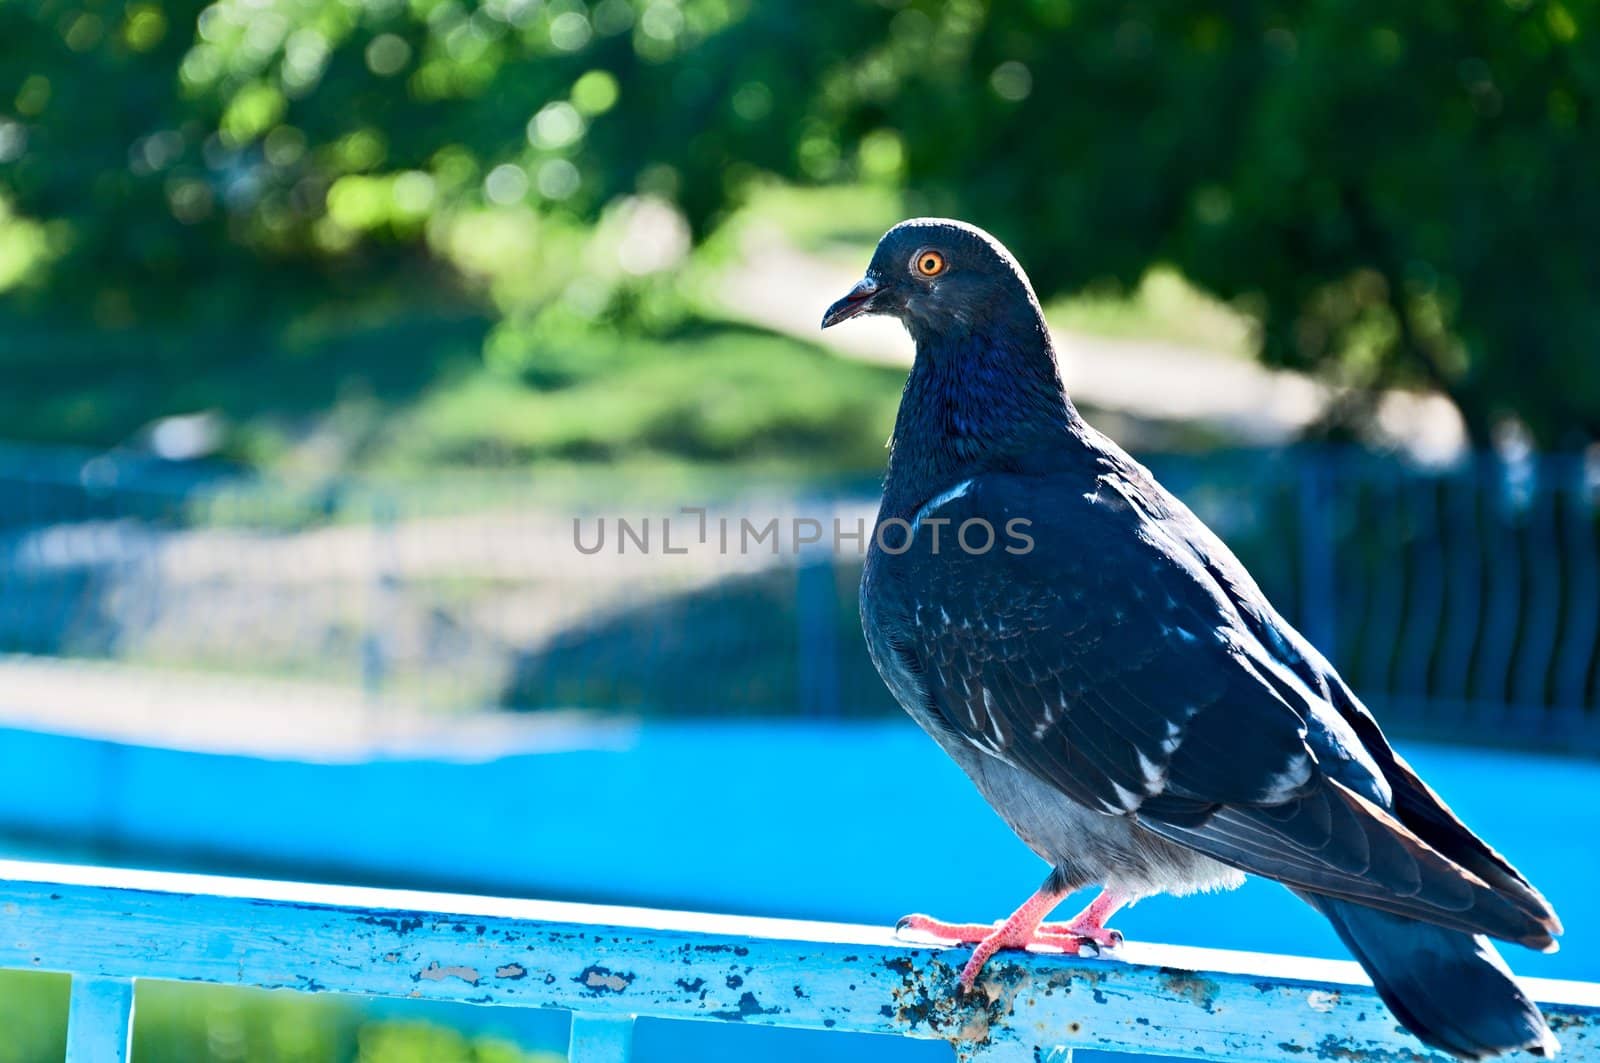 The blue rock pigeon sits on a handrail in city park